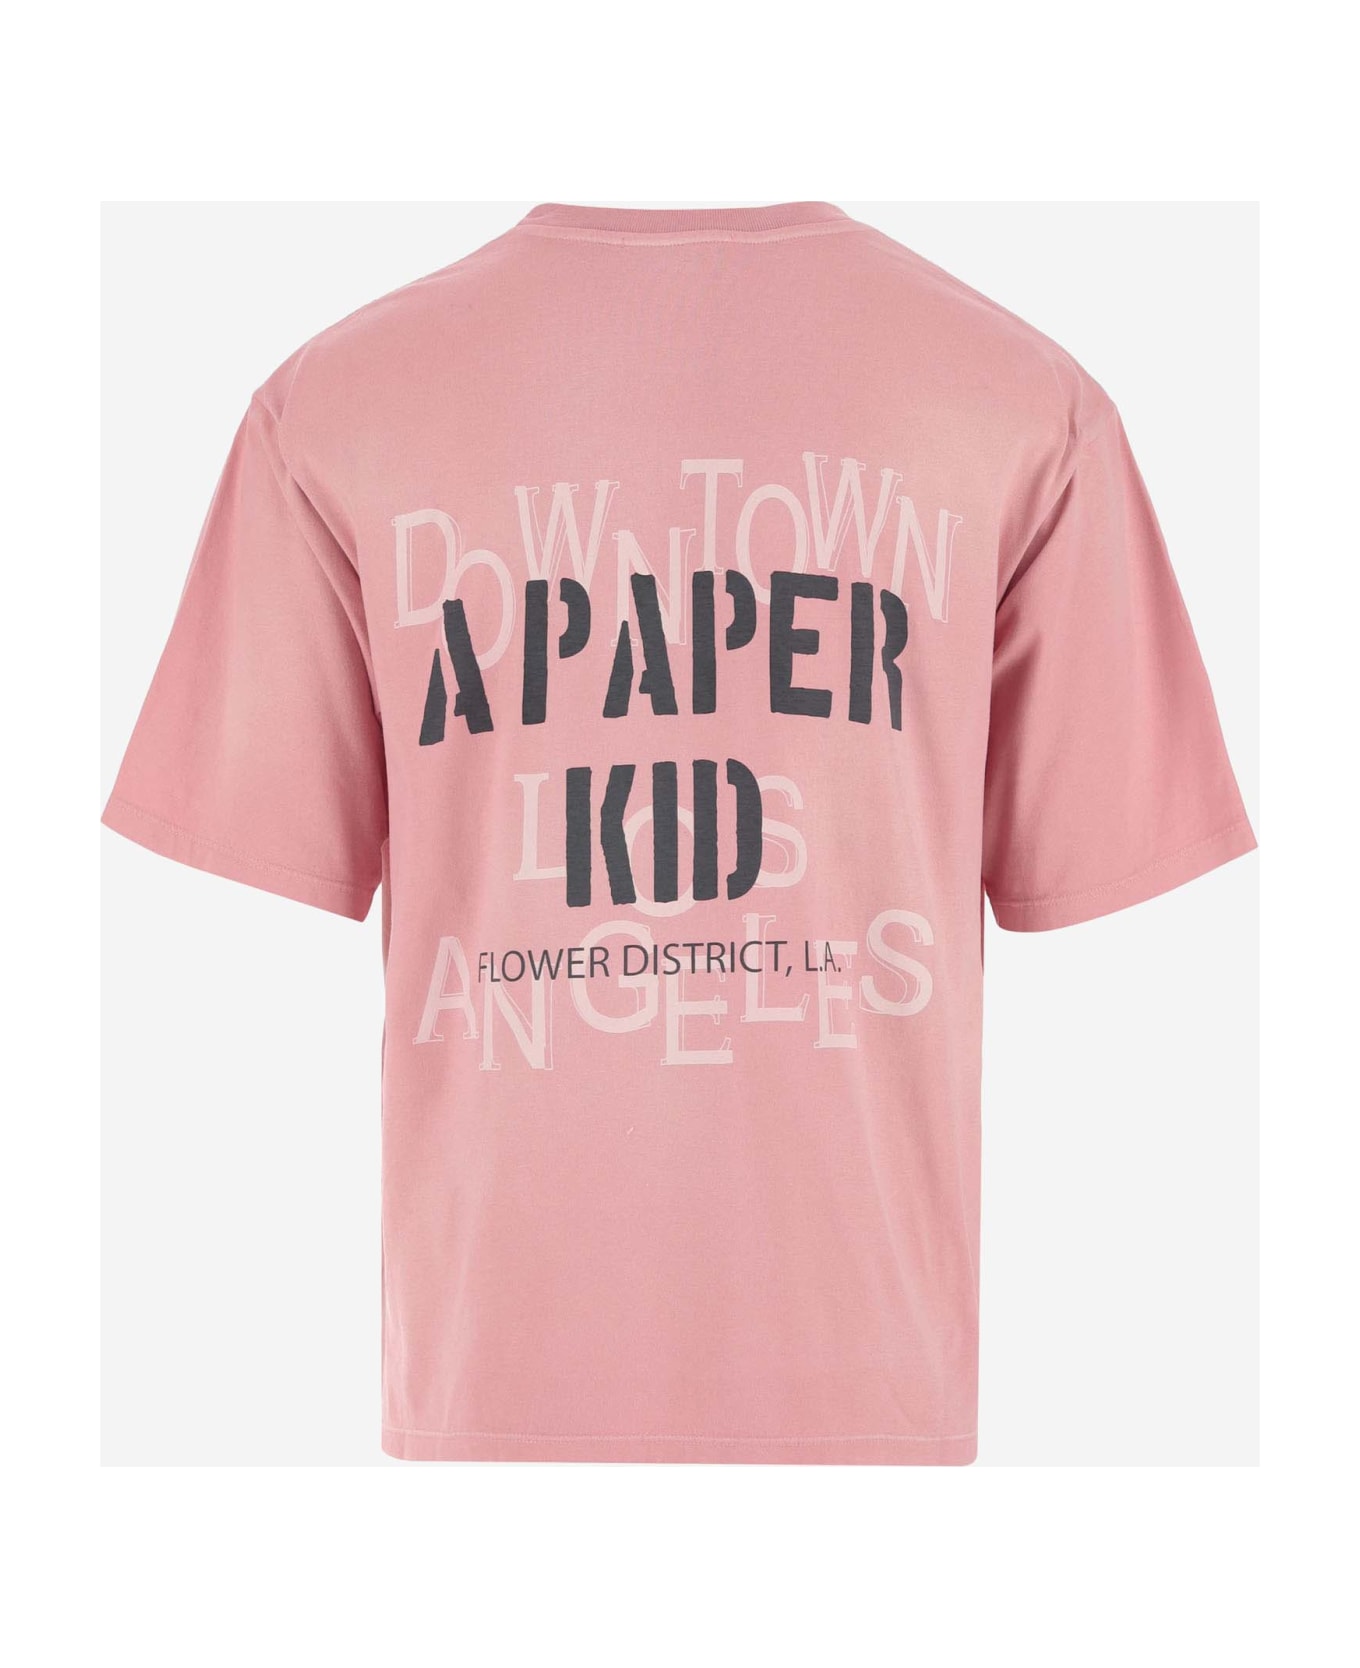 A Paper Kid Cotton T-shirt With Logo - Coral Red シャツ